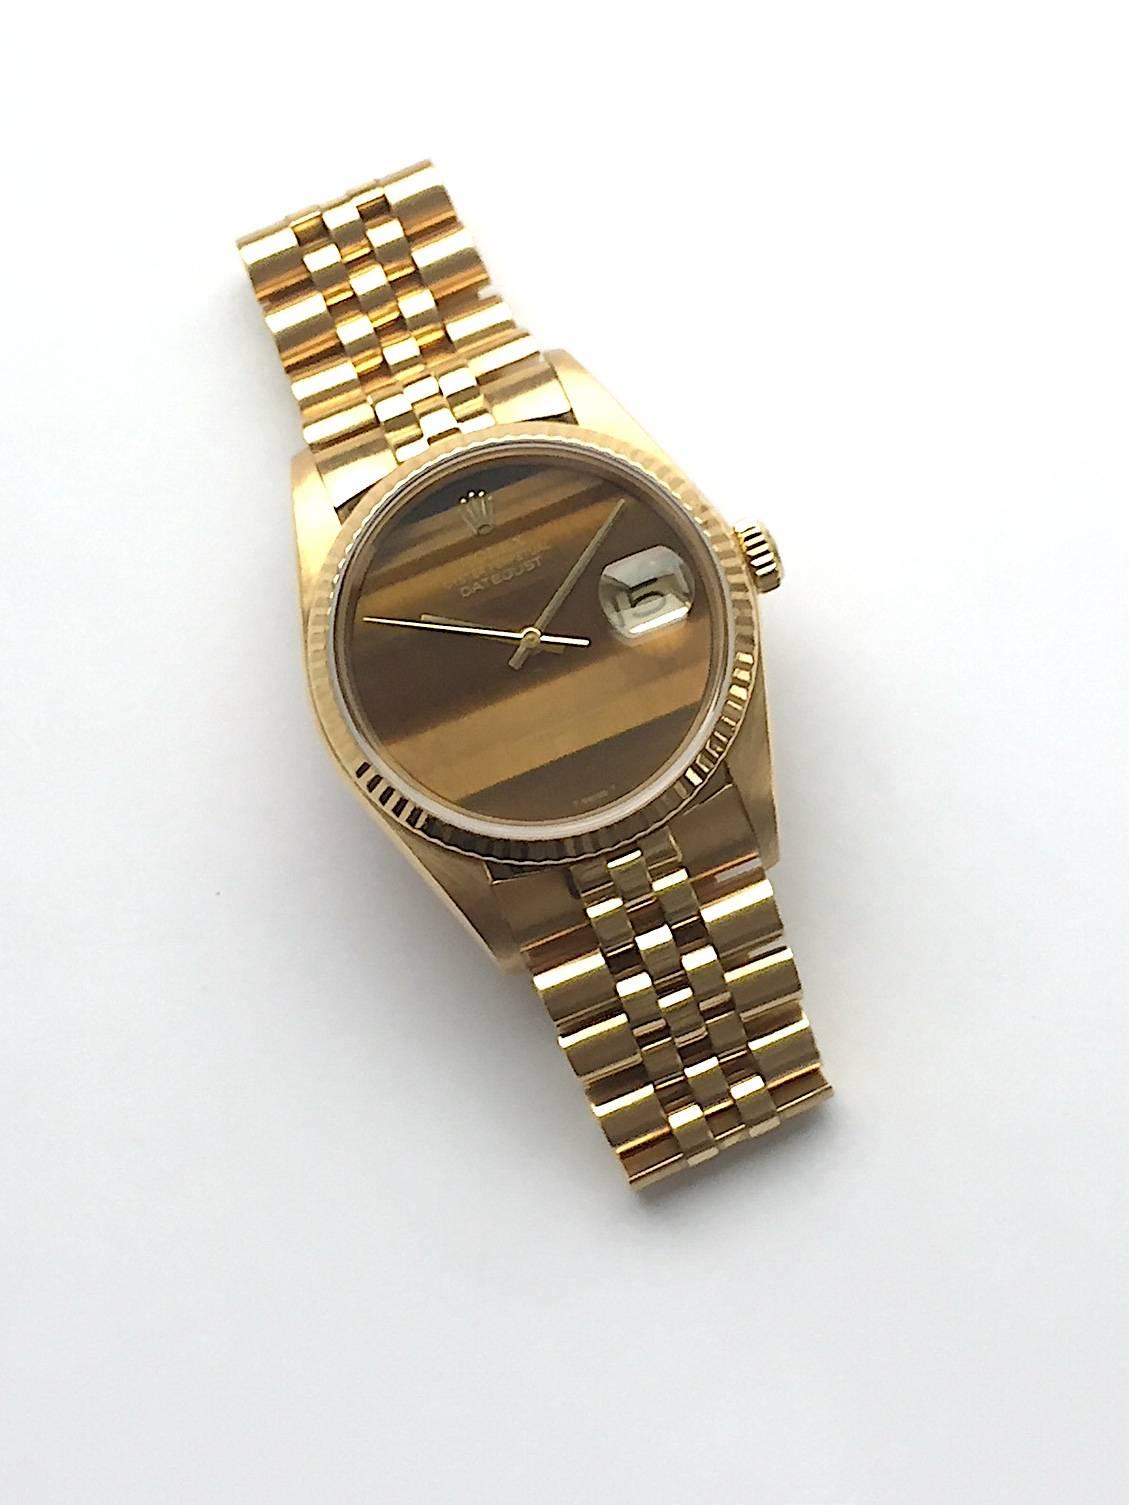 tiger's eye dial on the datejust